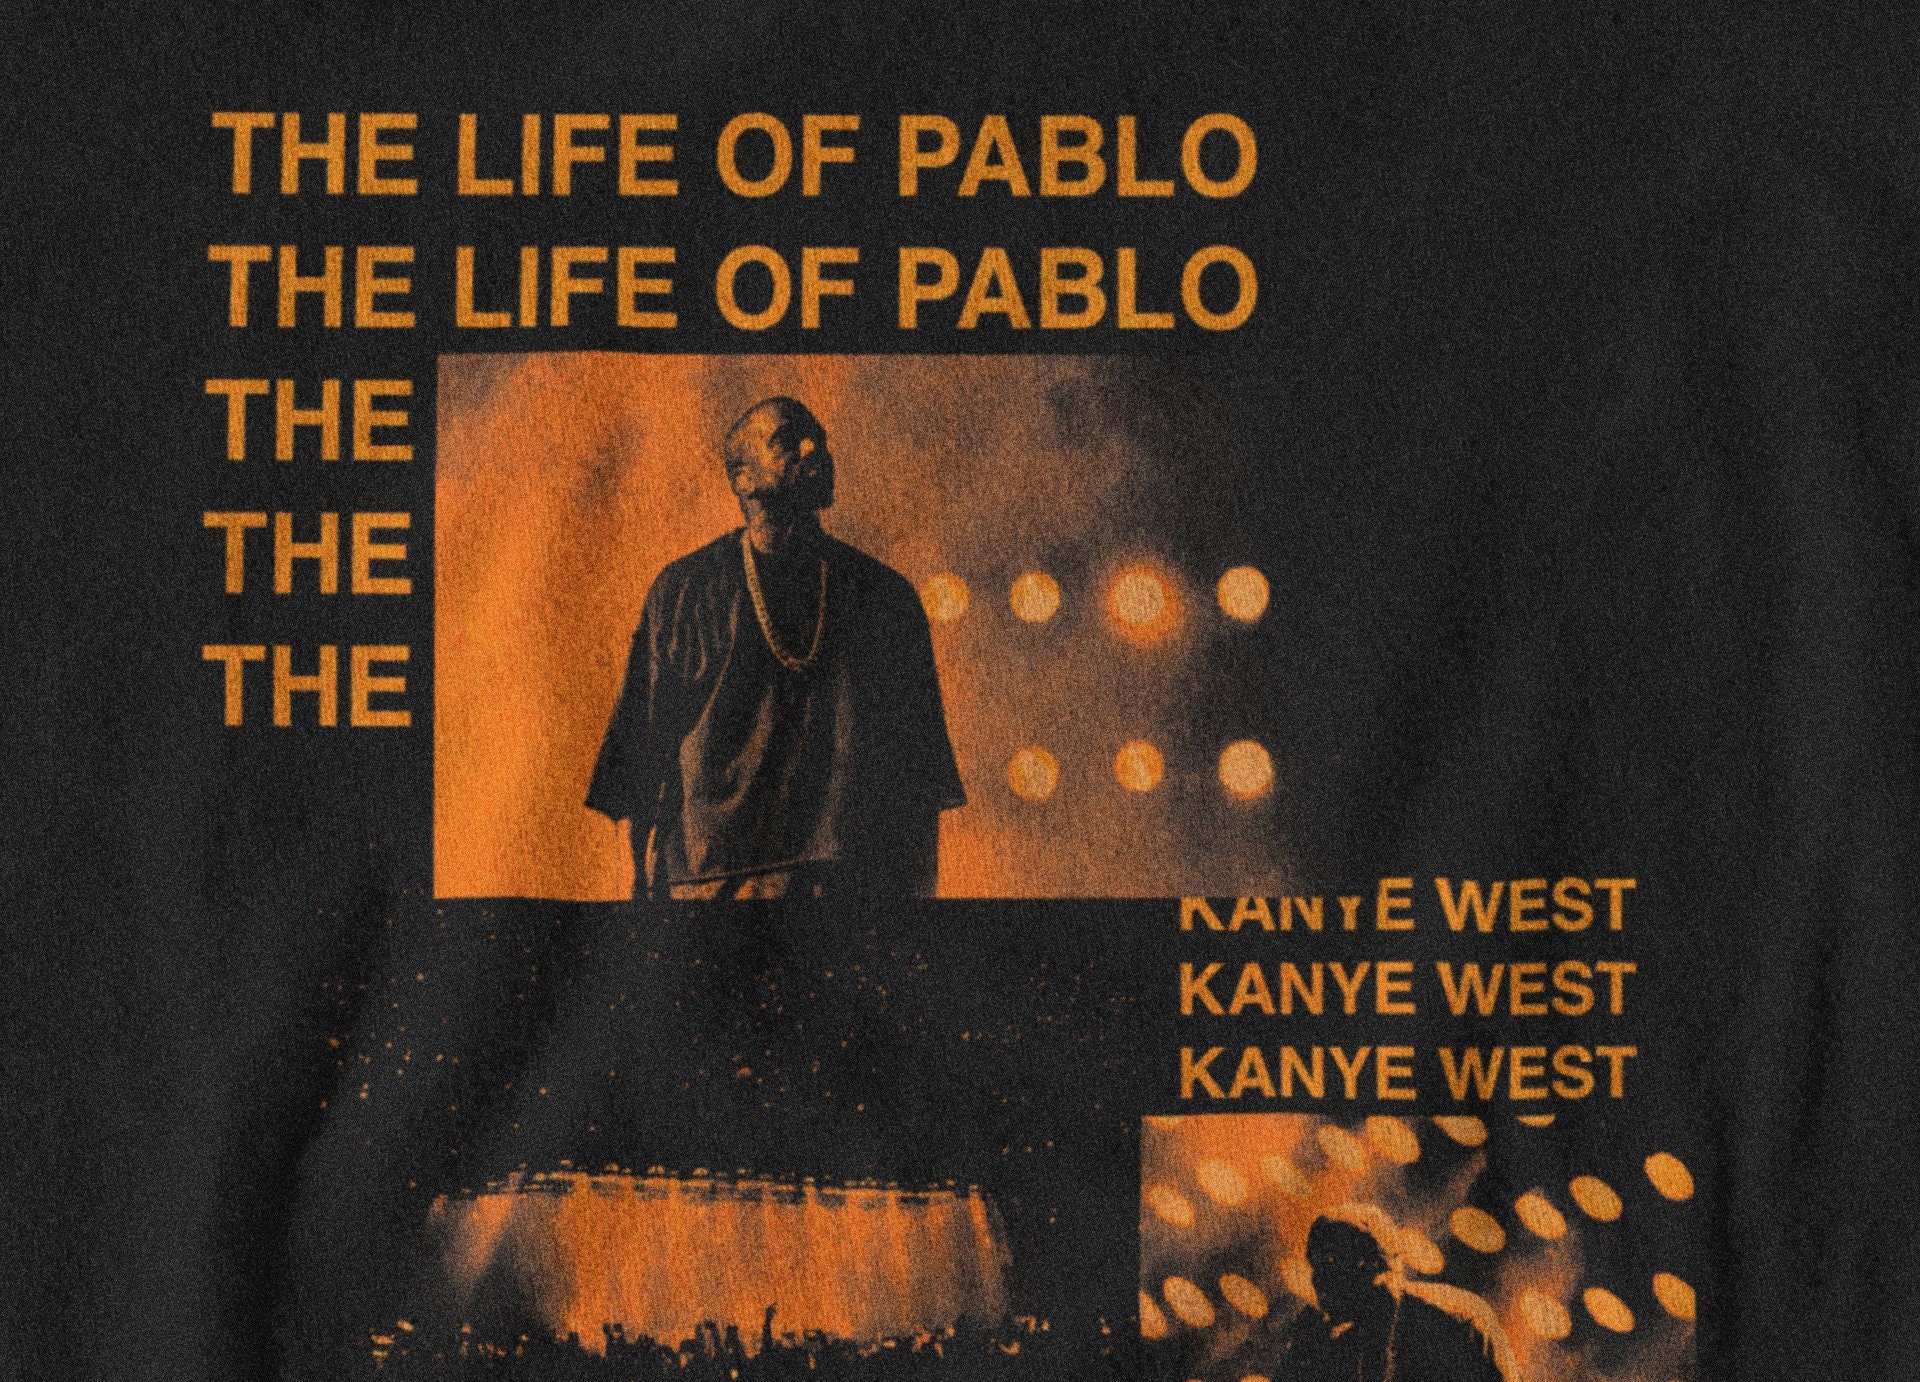 Kanye West Jeen-yuhs The Life Of Pablo Inspired Album Cover Style T Shirt